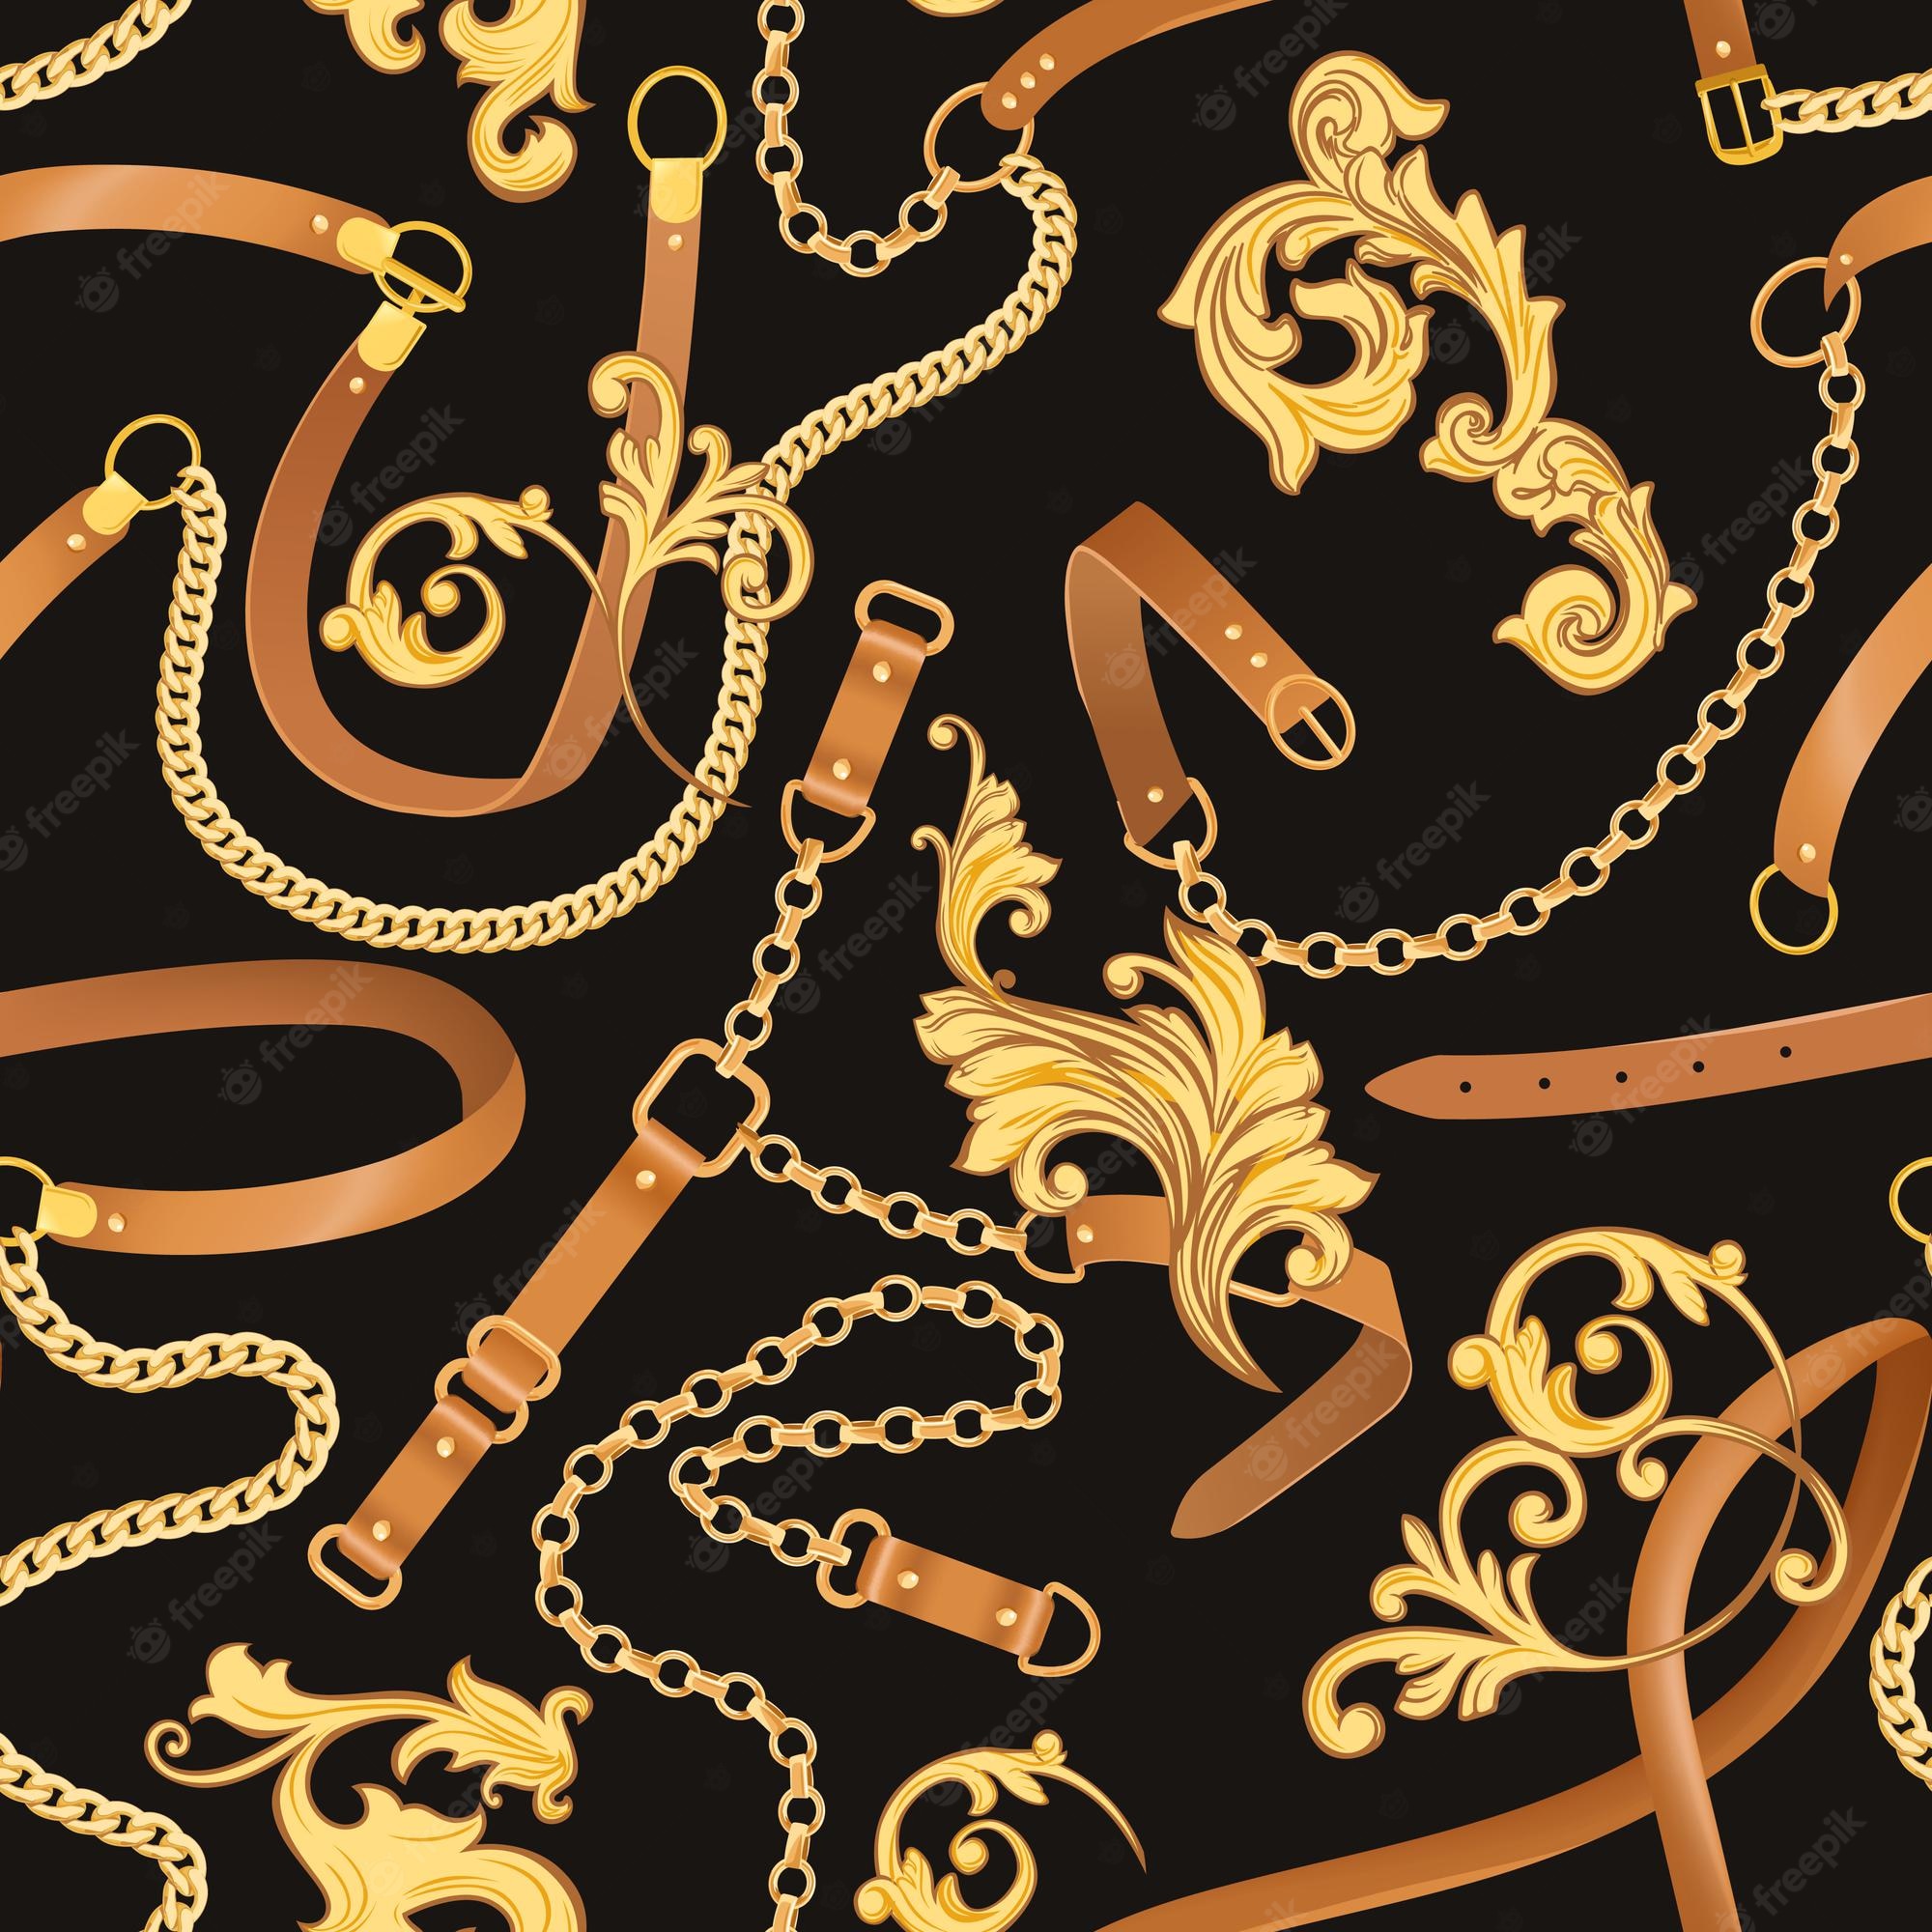 Premium Vector Fashion Fabric Seamless Pattern With Golden